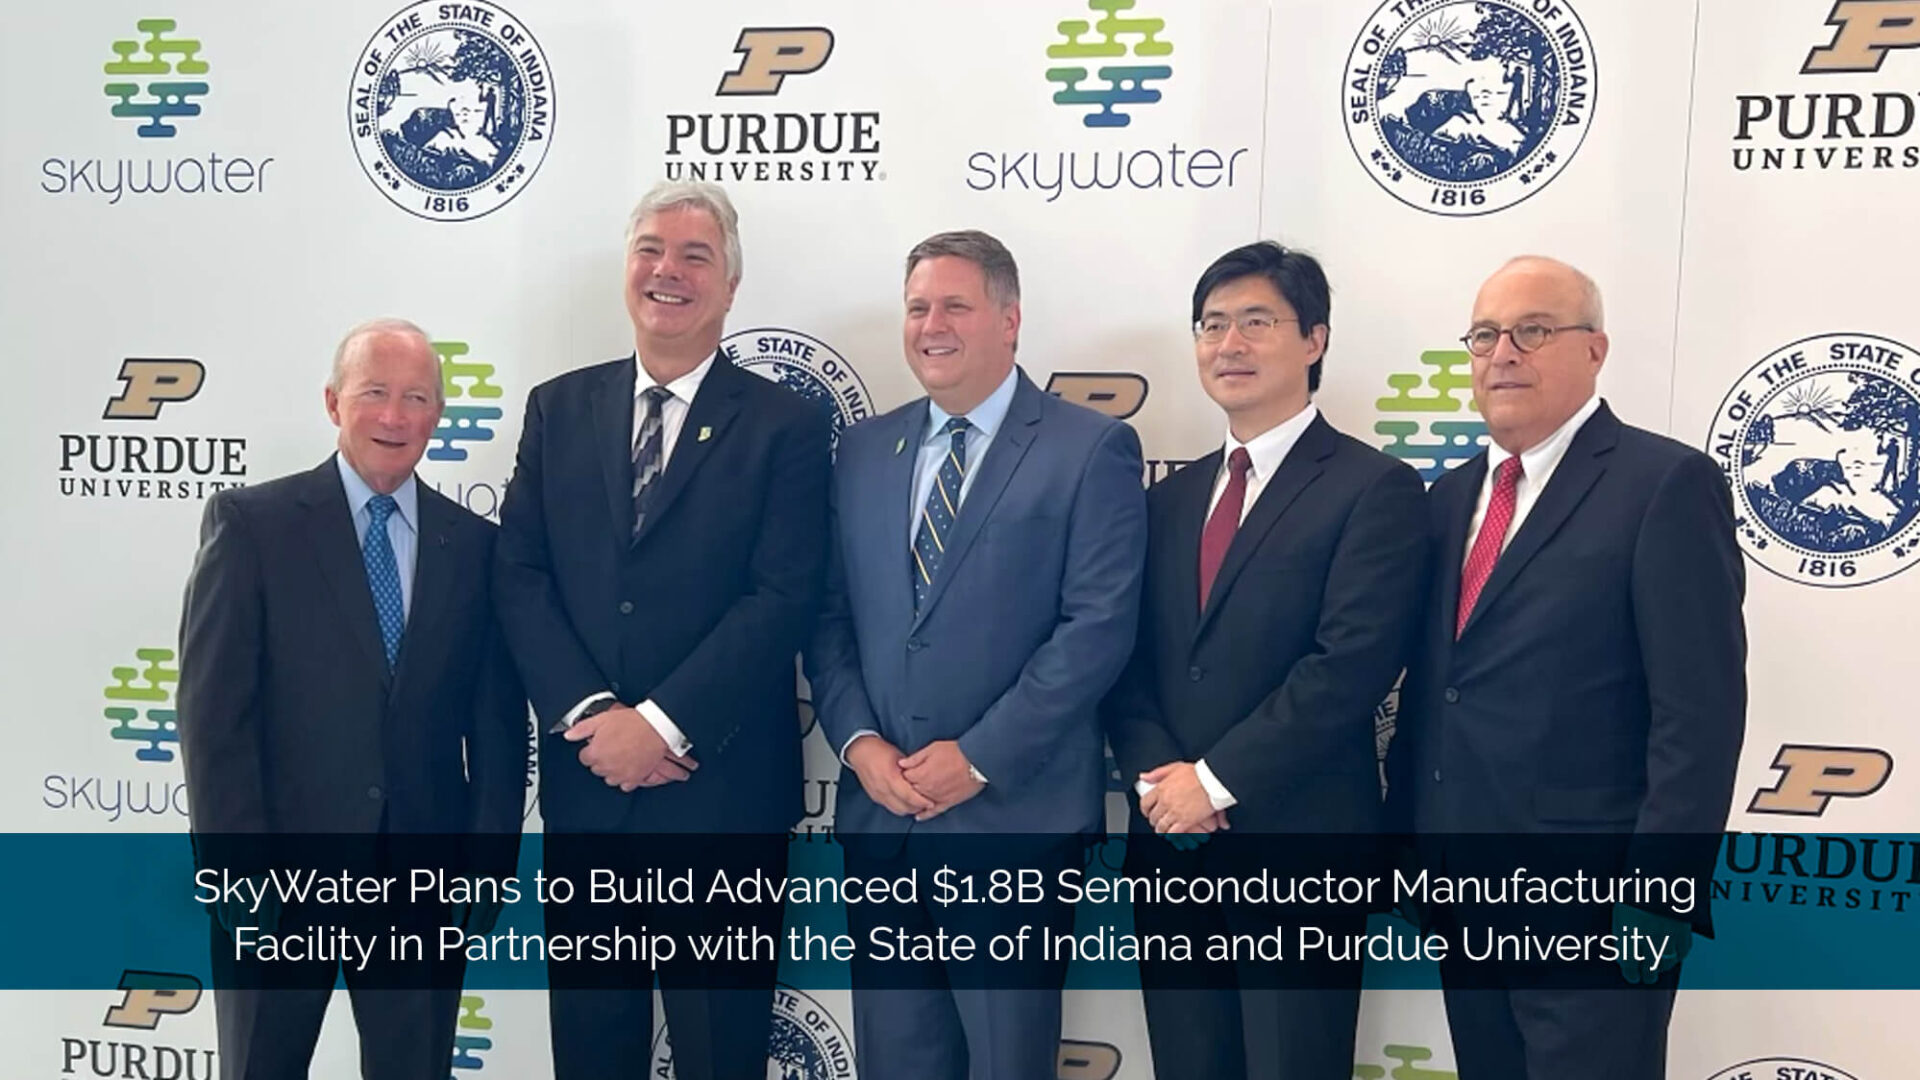 SkyWater Plans to Build Advanced $1.8B Semiconductor Manufacturing Facility in Partnership with the State of Indiana and Purdue University